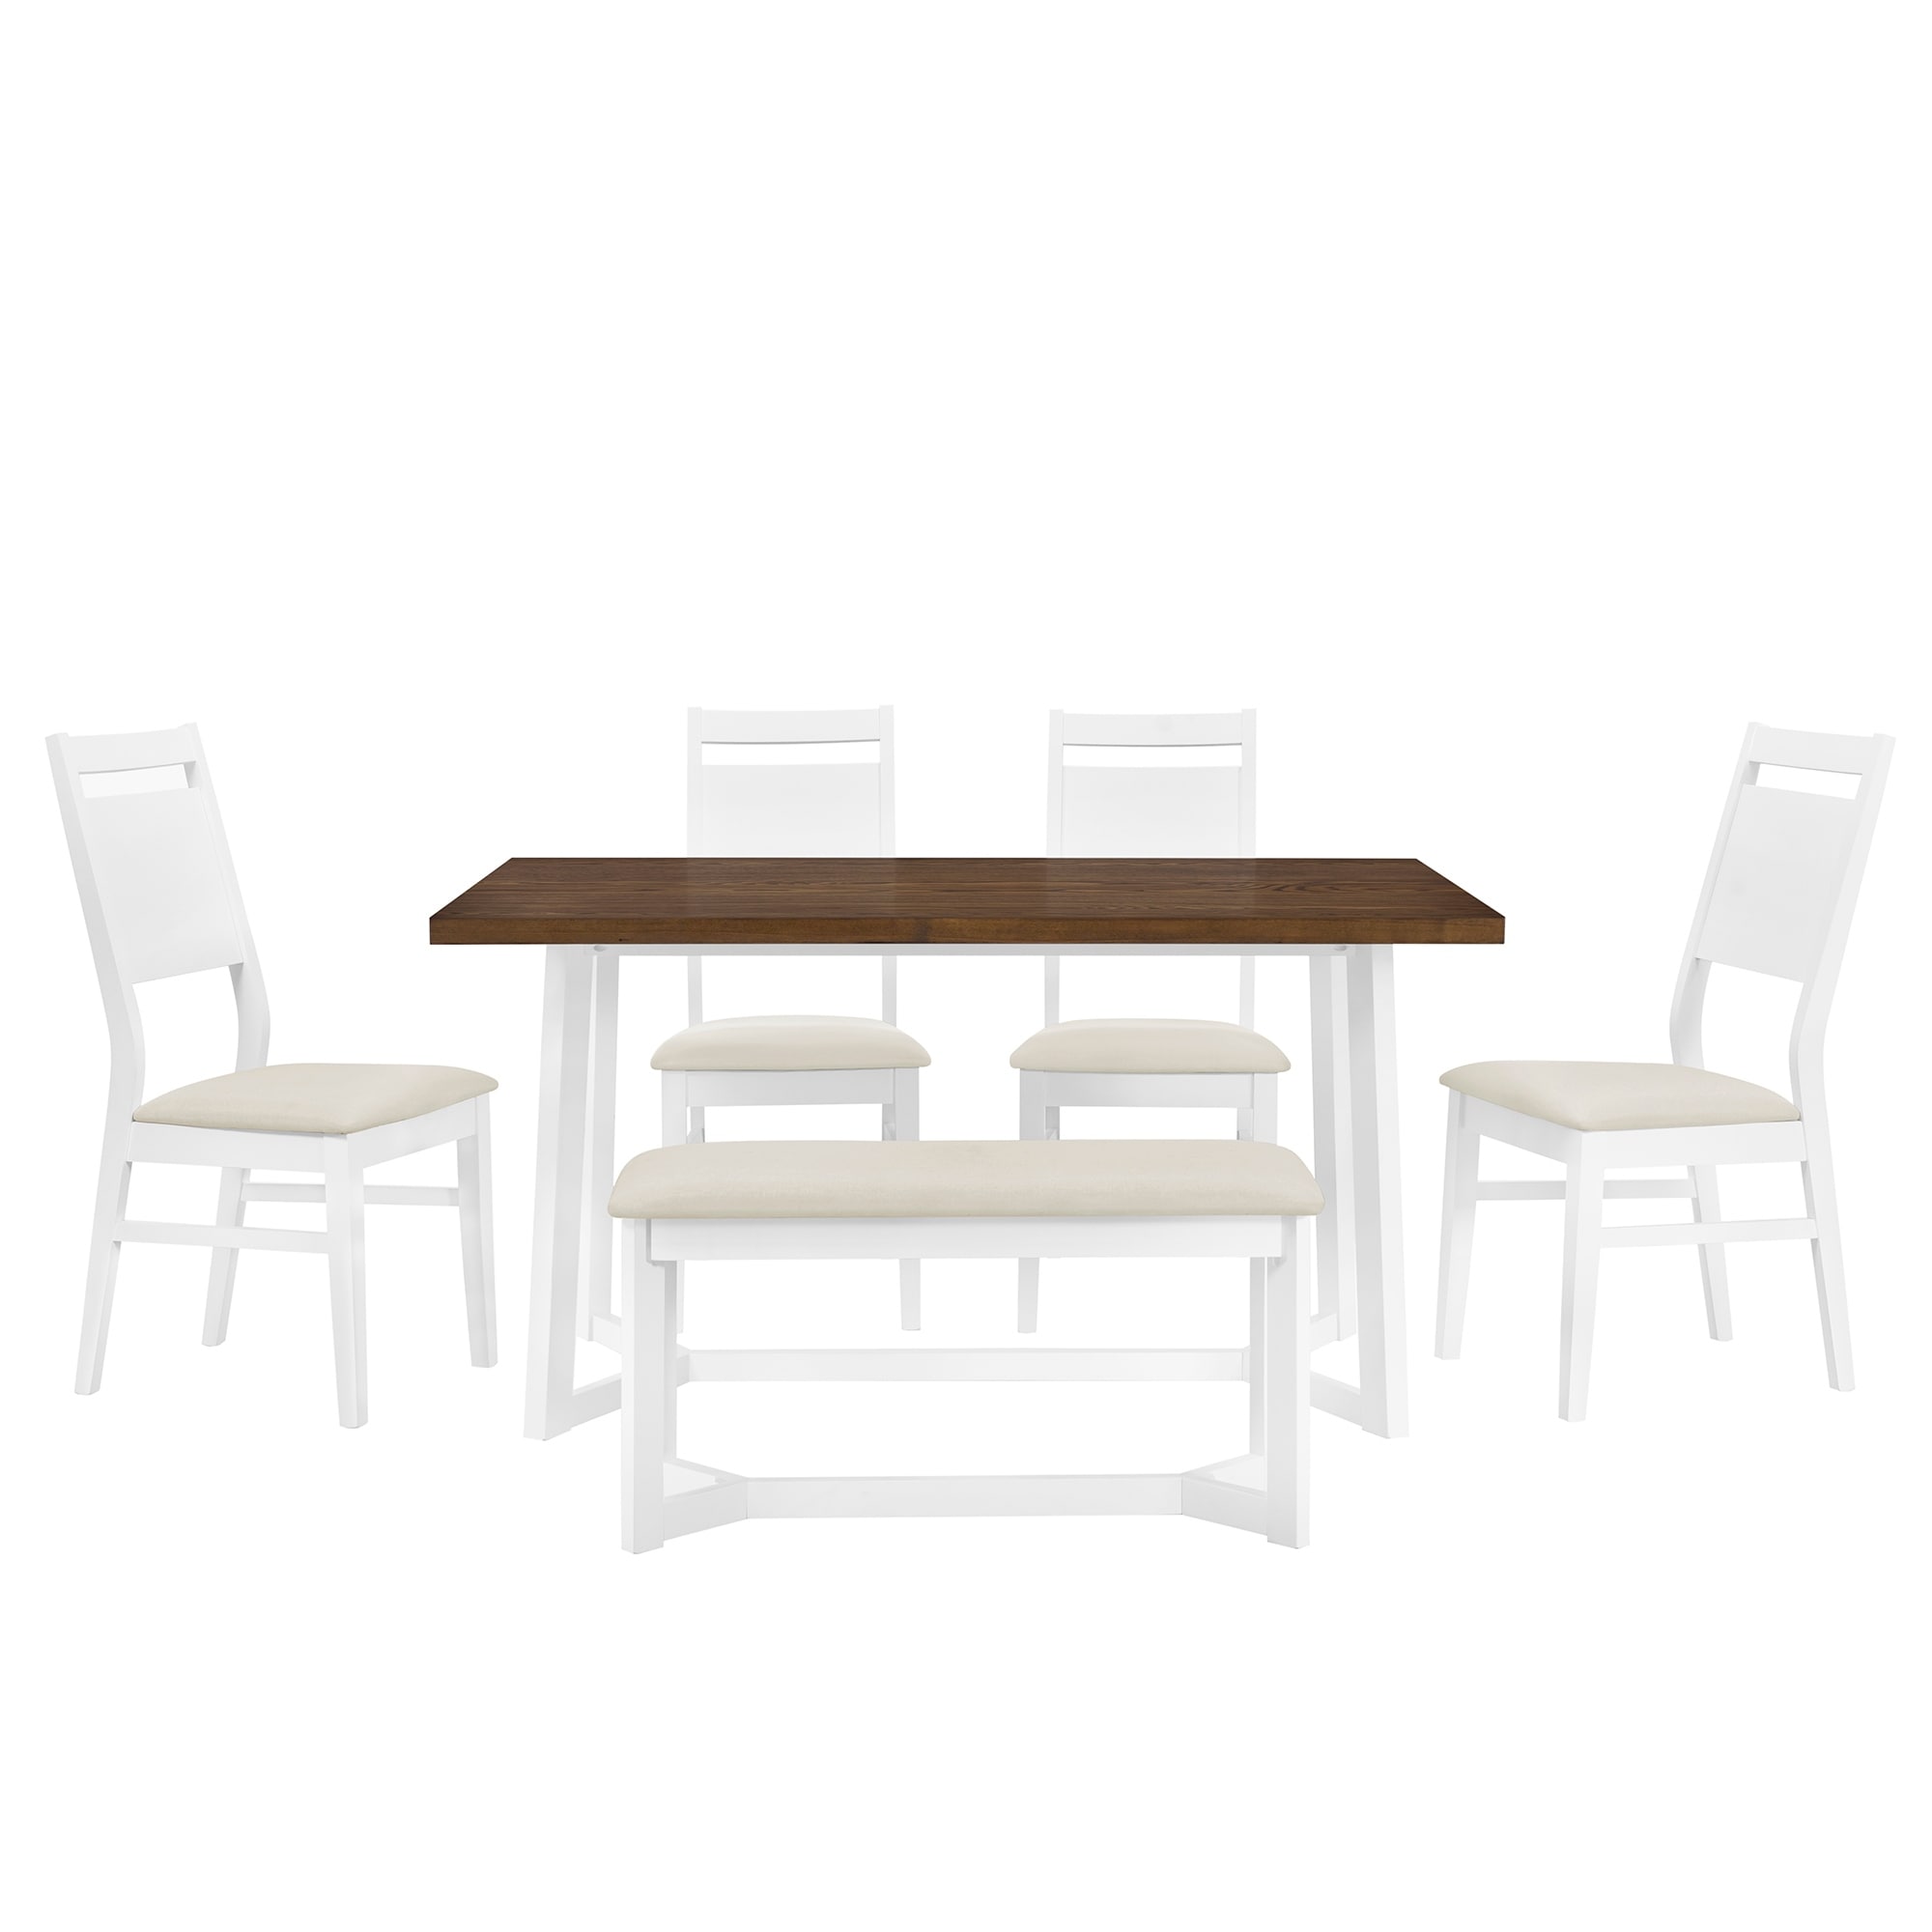 White Farmhouse 6-Piece Dining Table Set with 4 Upholstered Chairs and Bench, Solid Wood